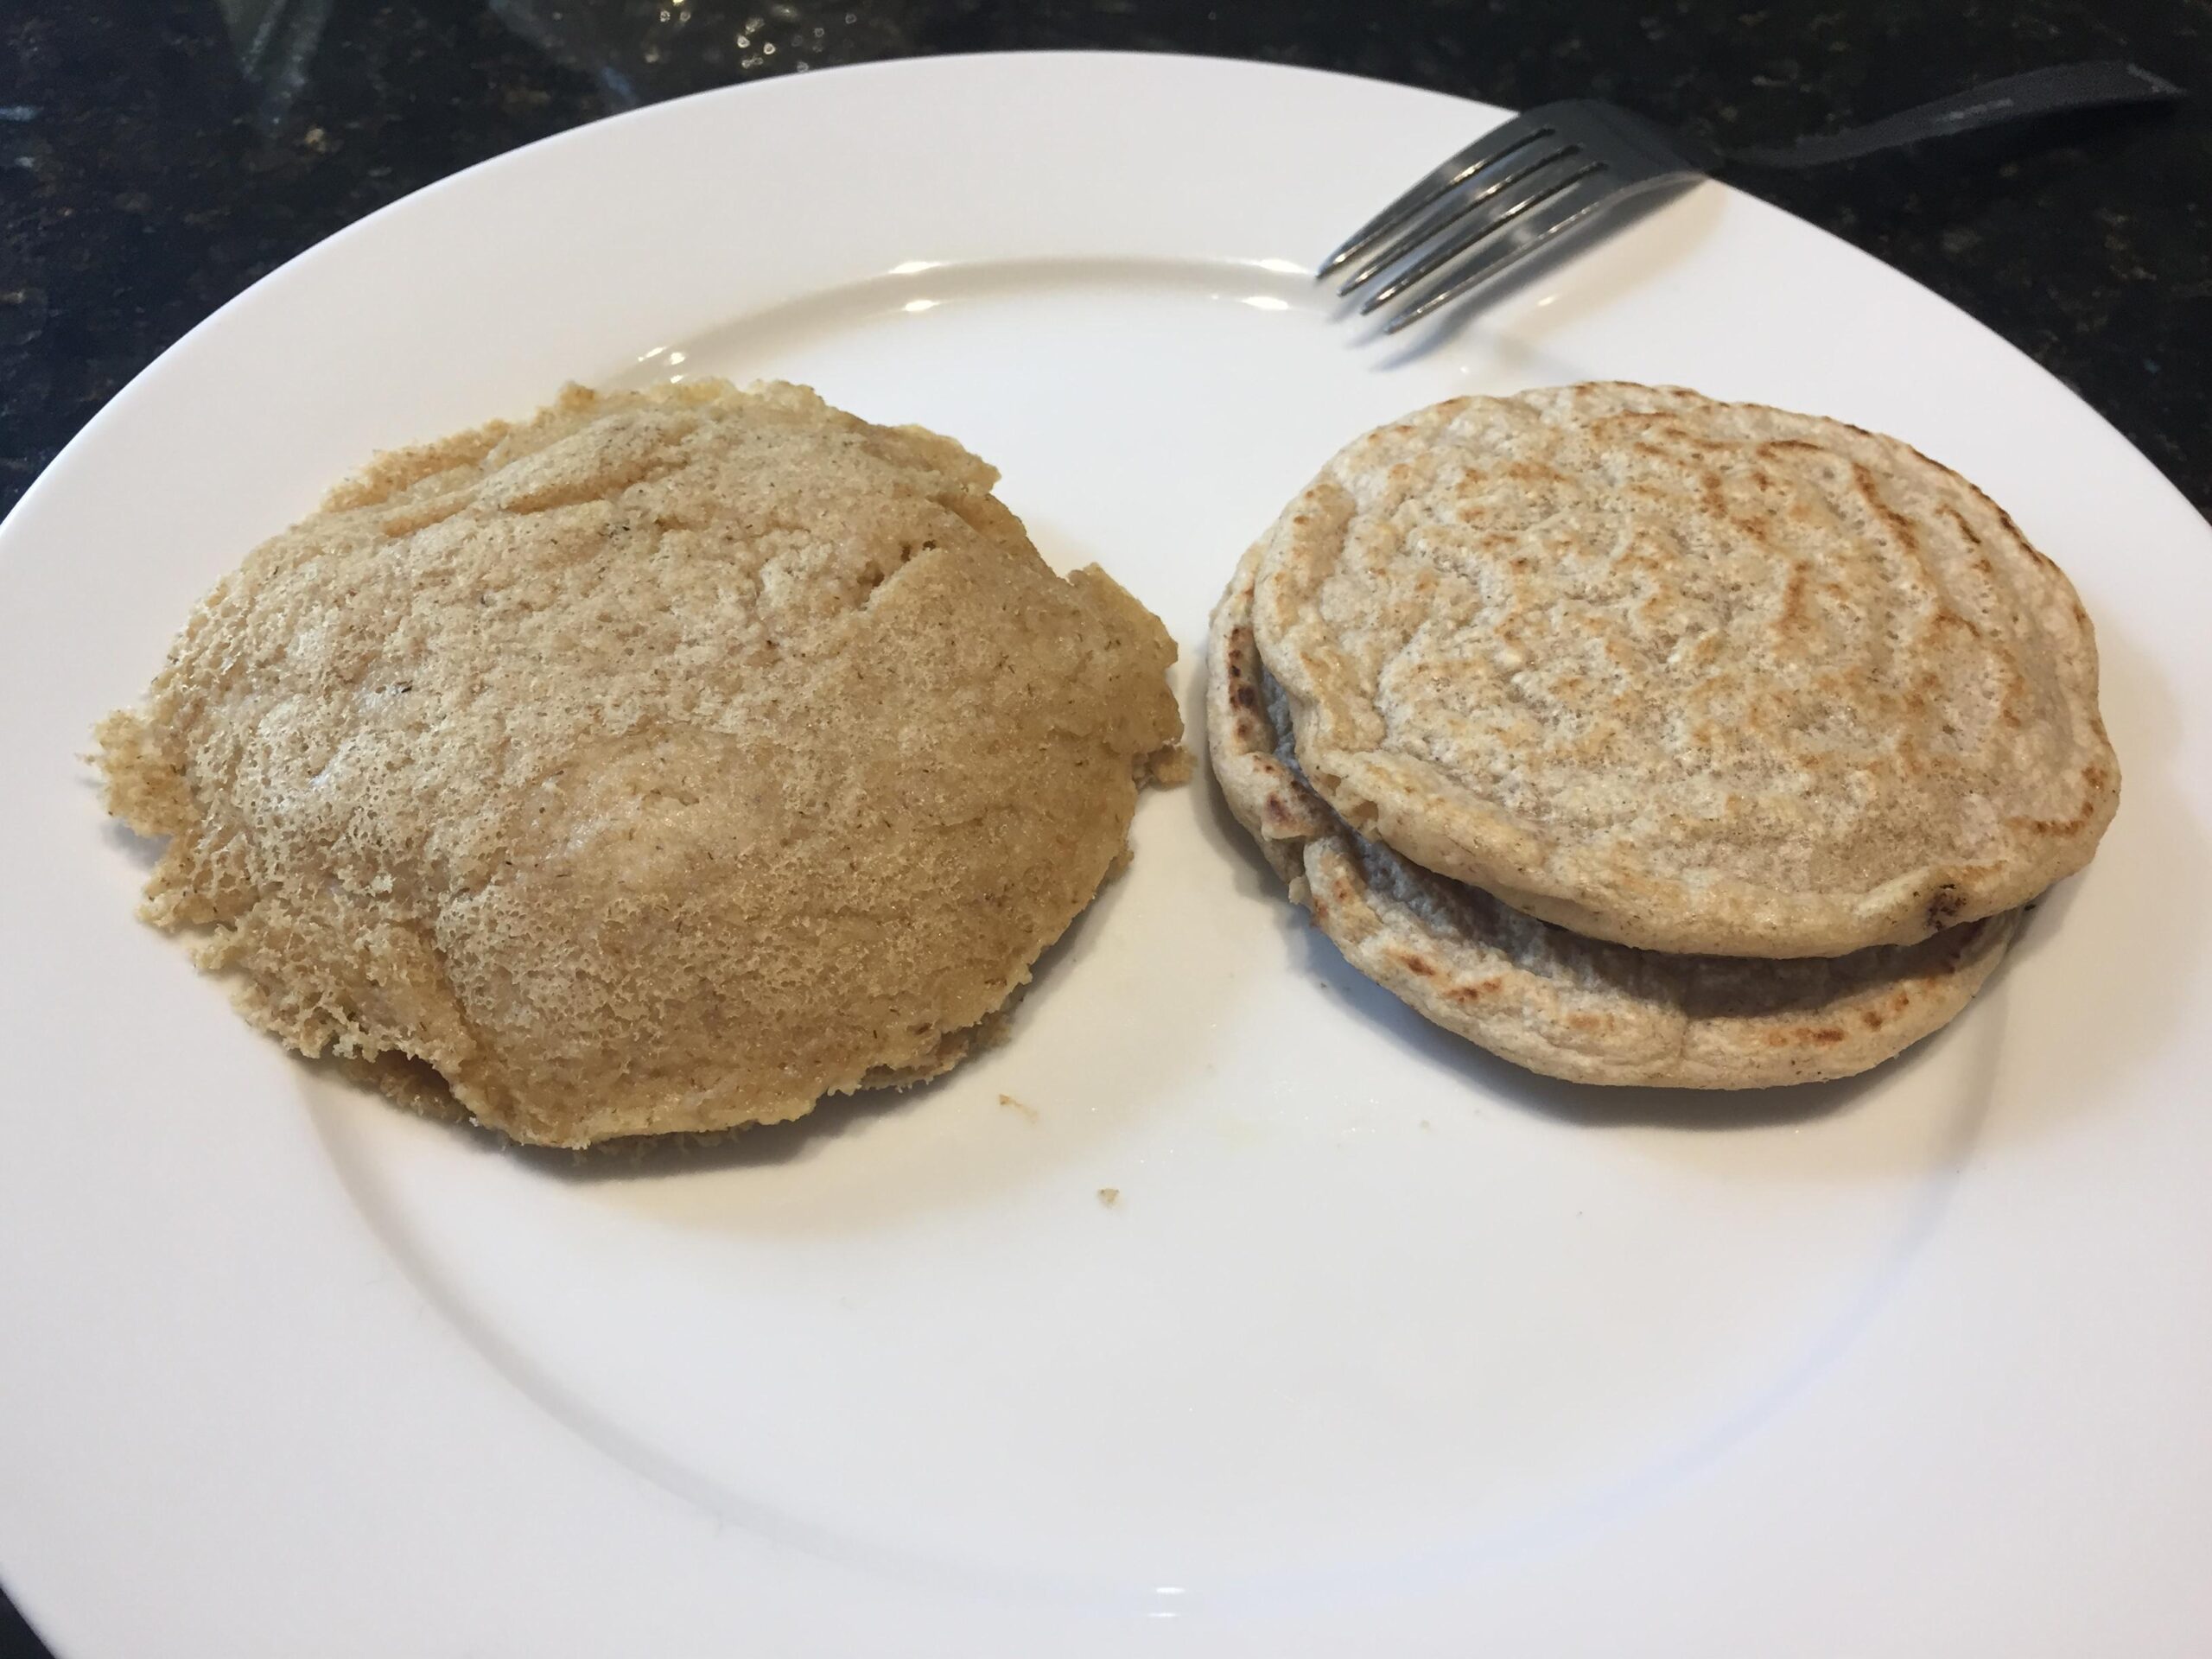  You won't believe these pancakes are vegan!